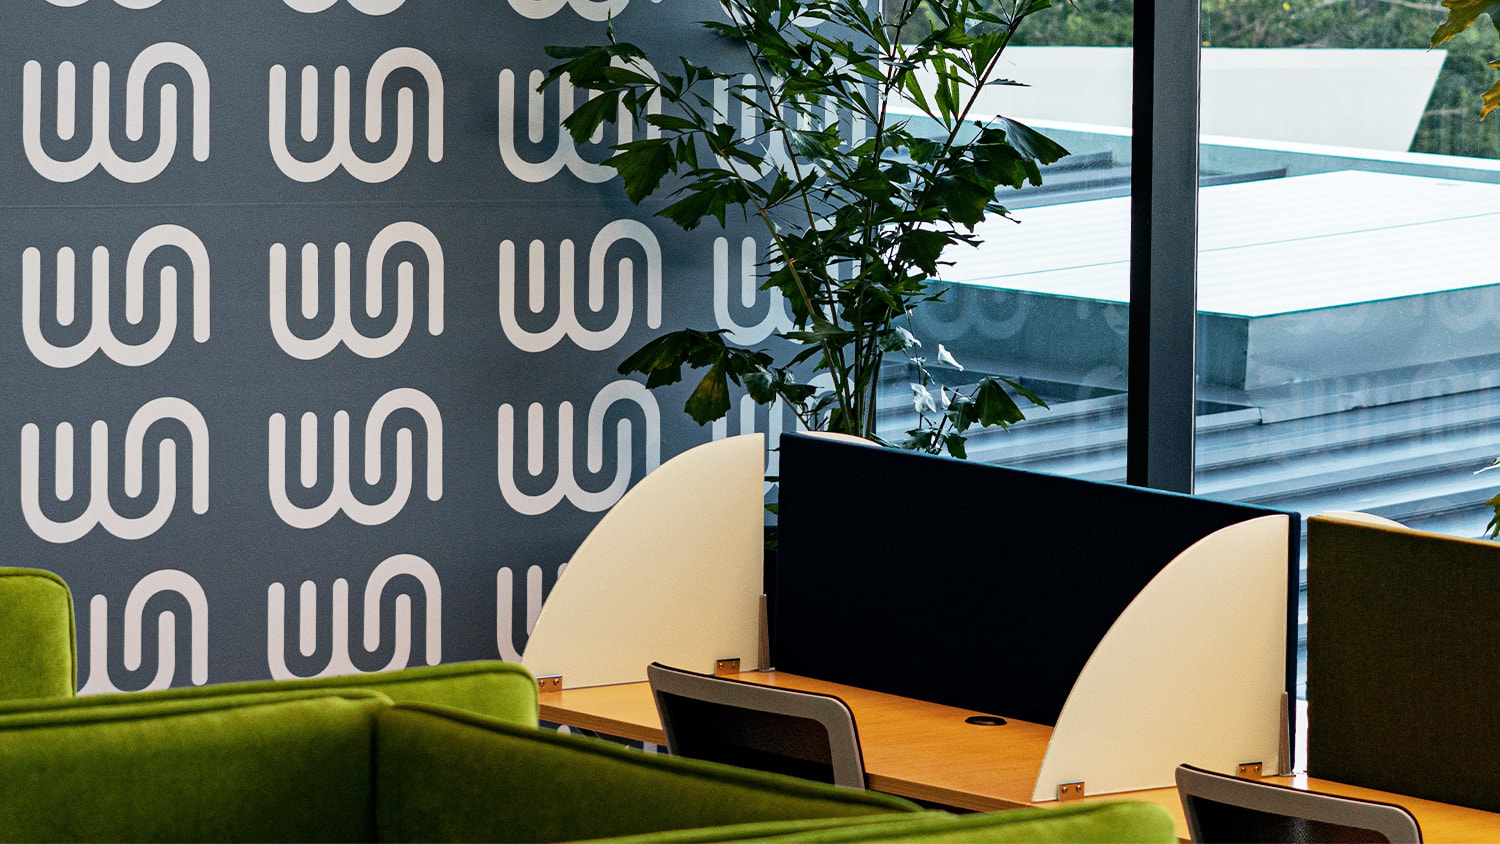 Inside of Workspace office space showing desks setupand the logo pattern on the wall